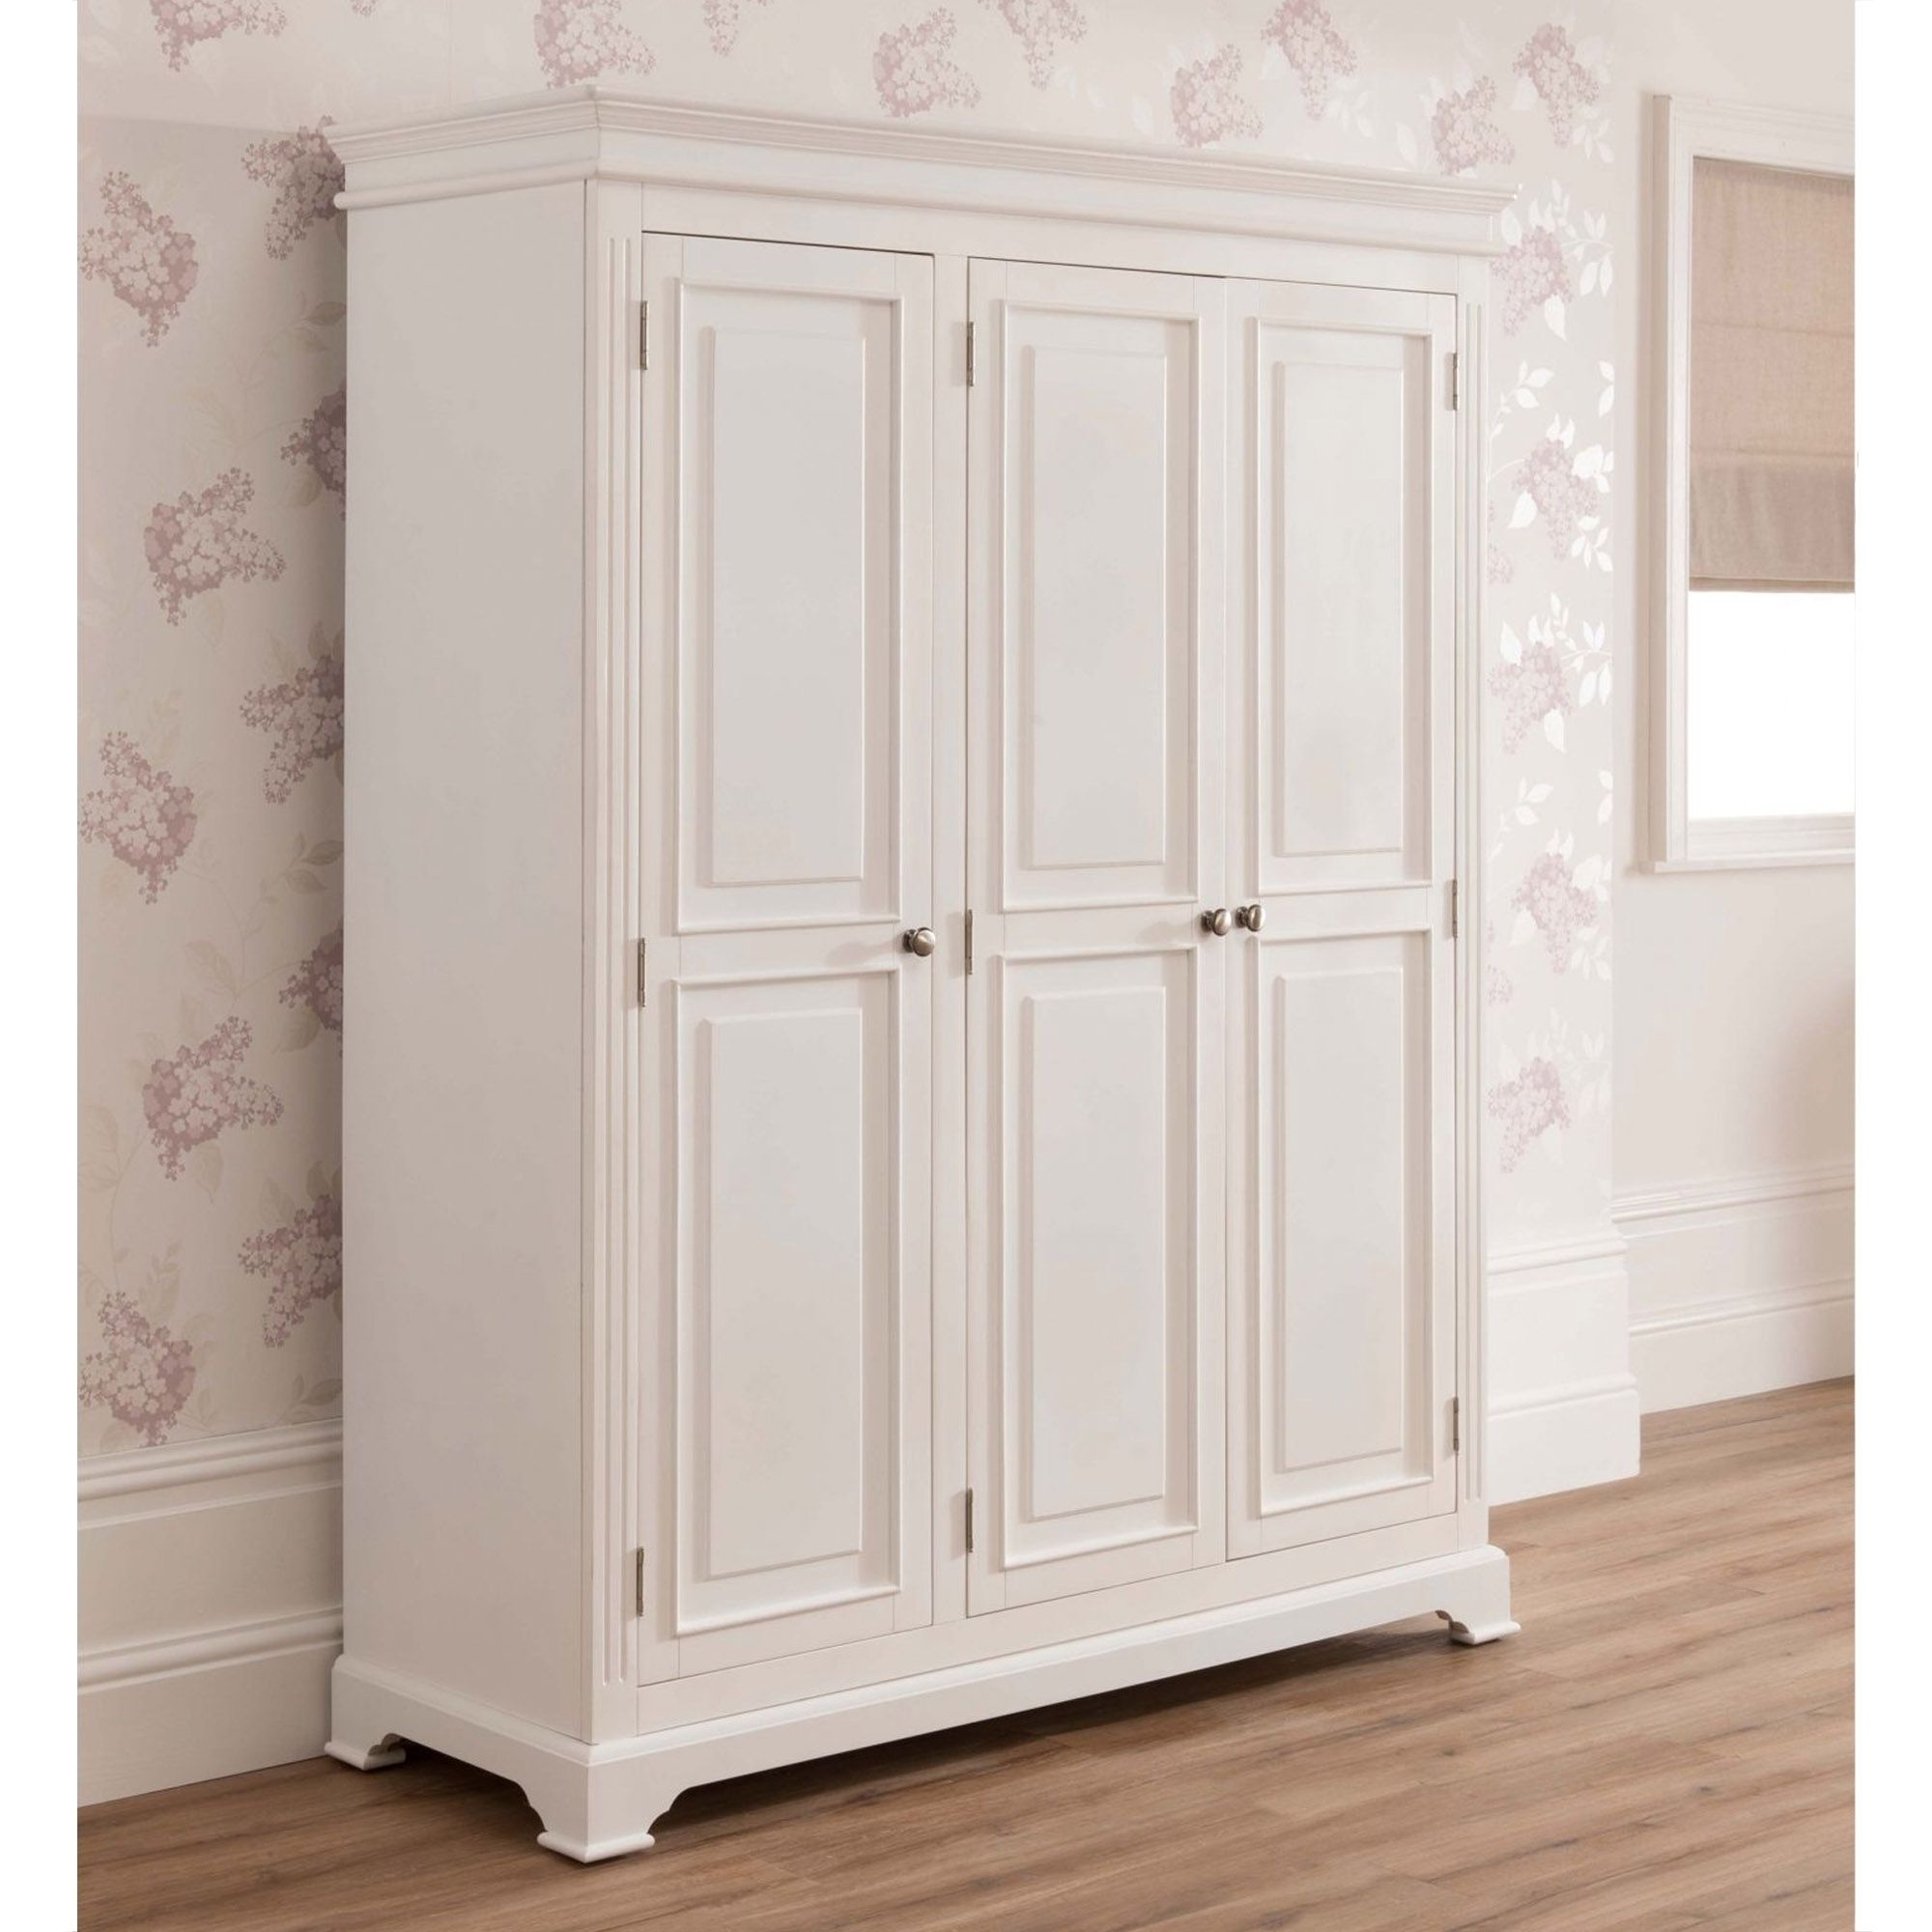 Sophia Shabby Chic Wardrobe Is A Fantastic Addition To Our Antique French  Furniture With Regard To French Shabby Chic Wardrobes (View 5 of 20)